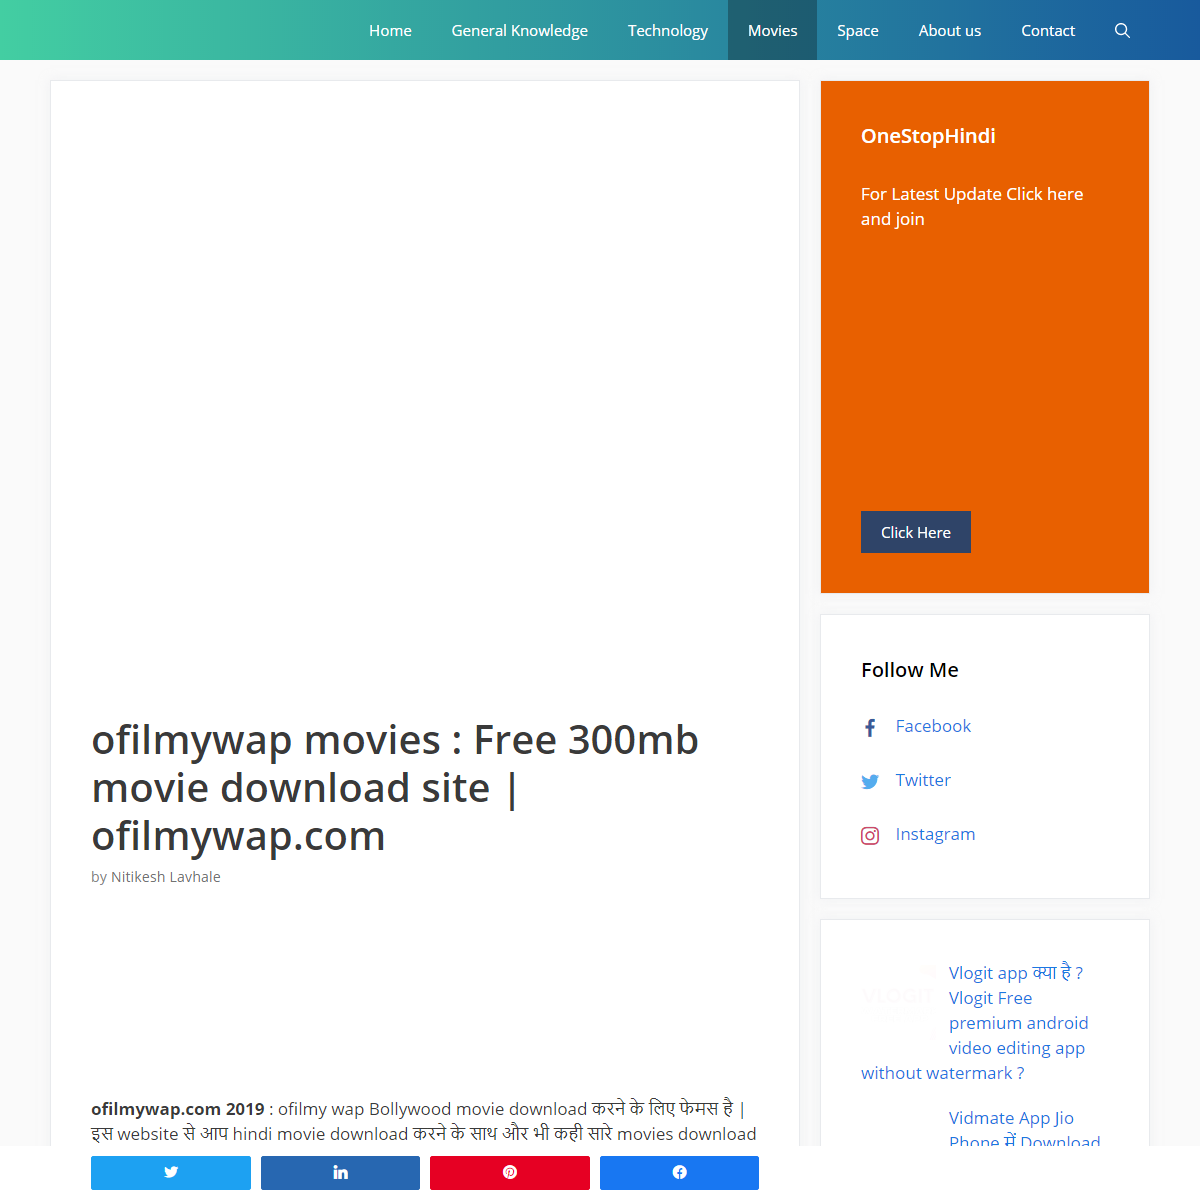 A complete backup of https://www.onestophindi.com/ofilmywap-movies/